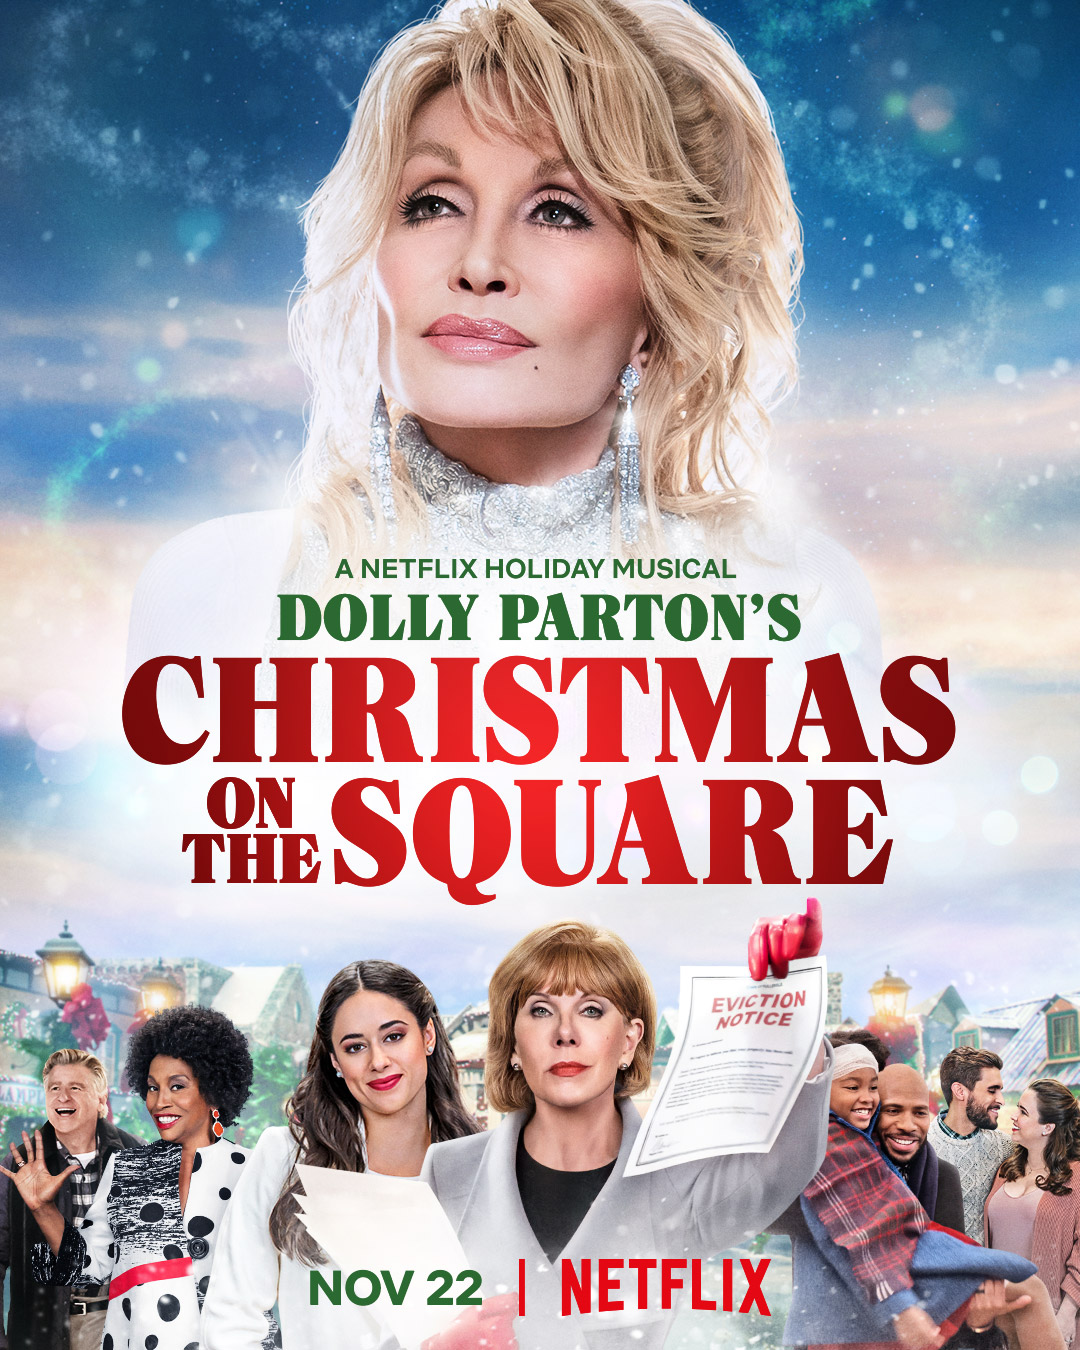 Dolly Parton's Christmas On The Square, produced by Dolly Parton, Sam Haskell, & Maria Schlatter, comes to Netflix